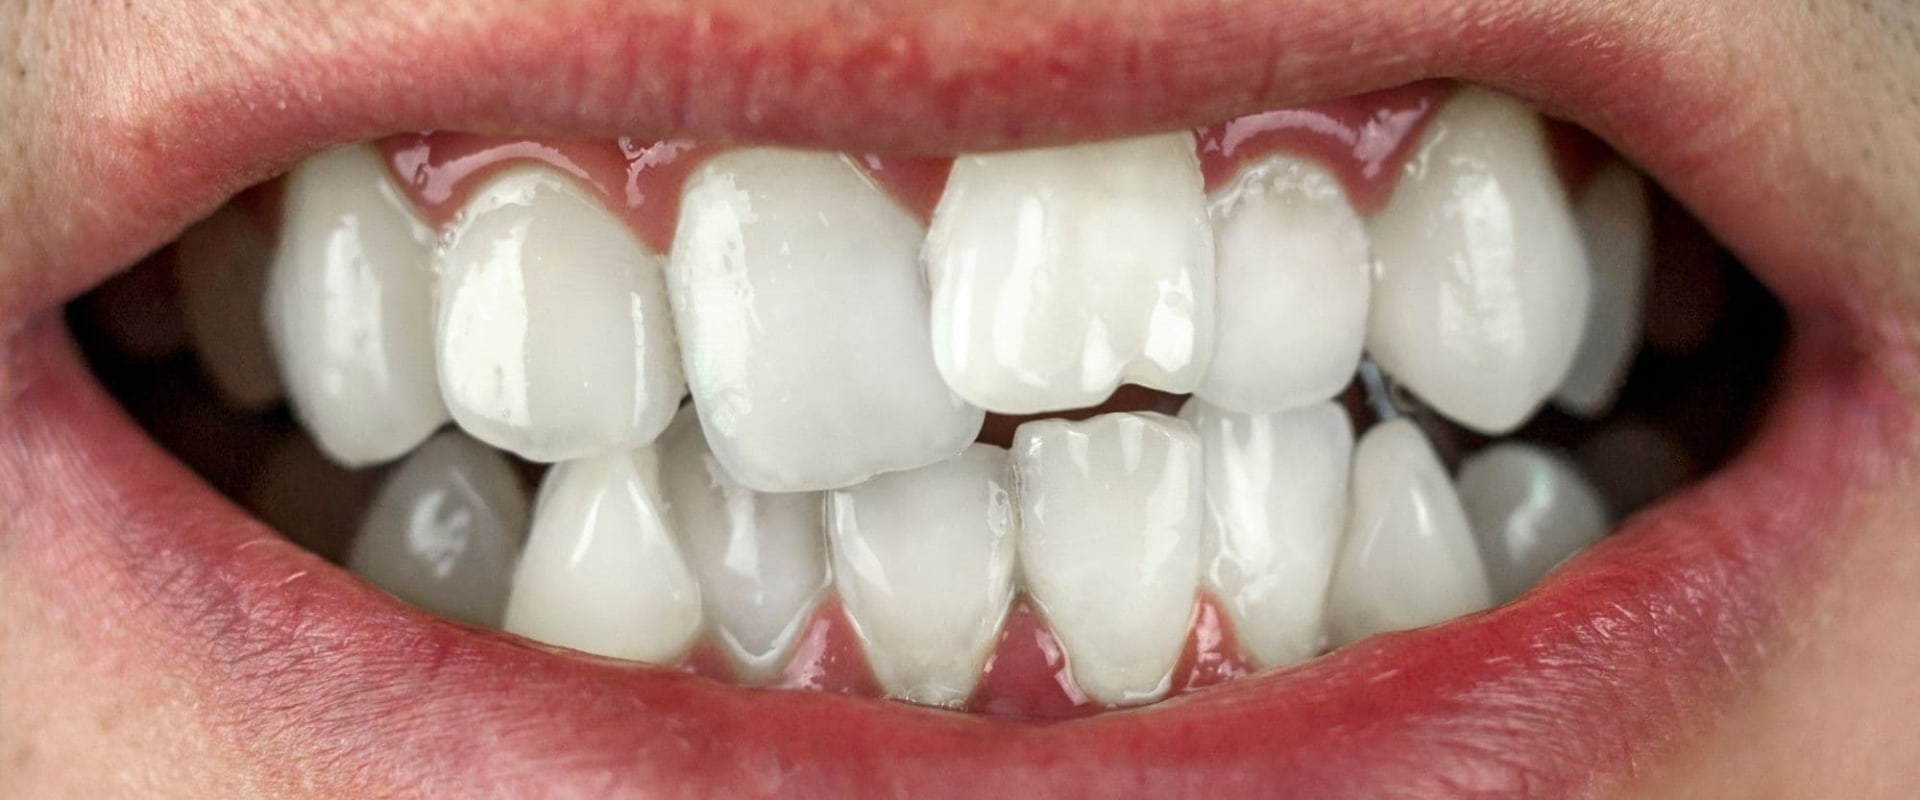 Smile Makeover: Get a Perfect Smile with Misaligned Teeth